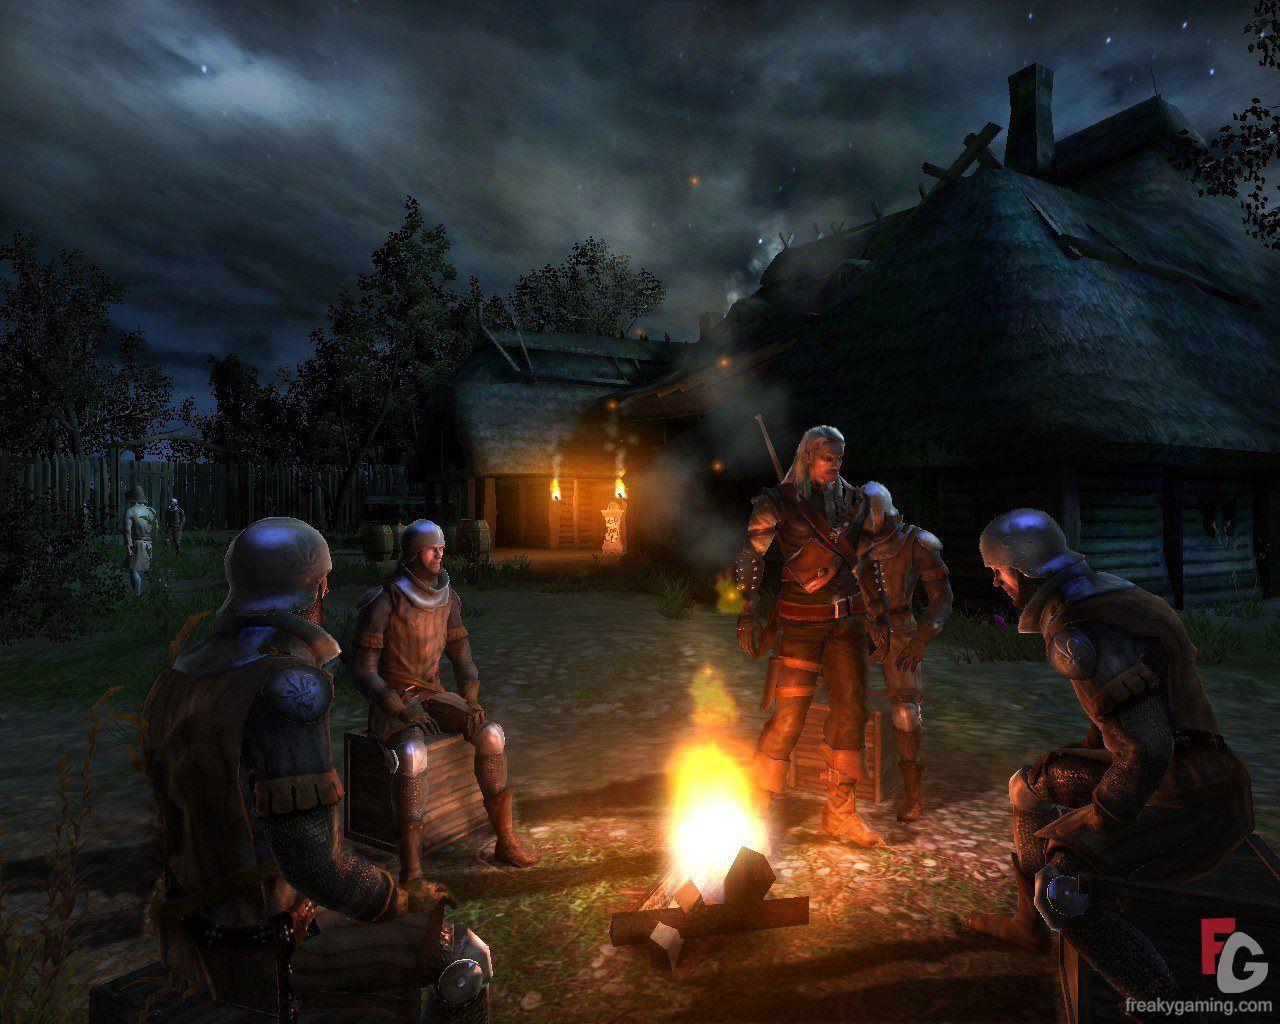 The Witcher Guards Around A Campfire Screenshot. Gallery at